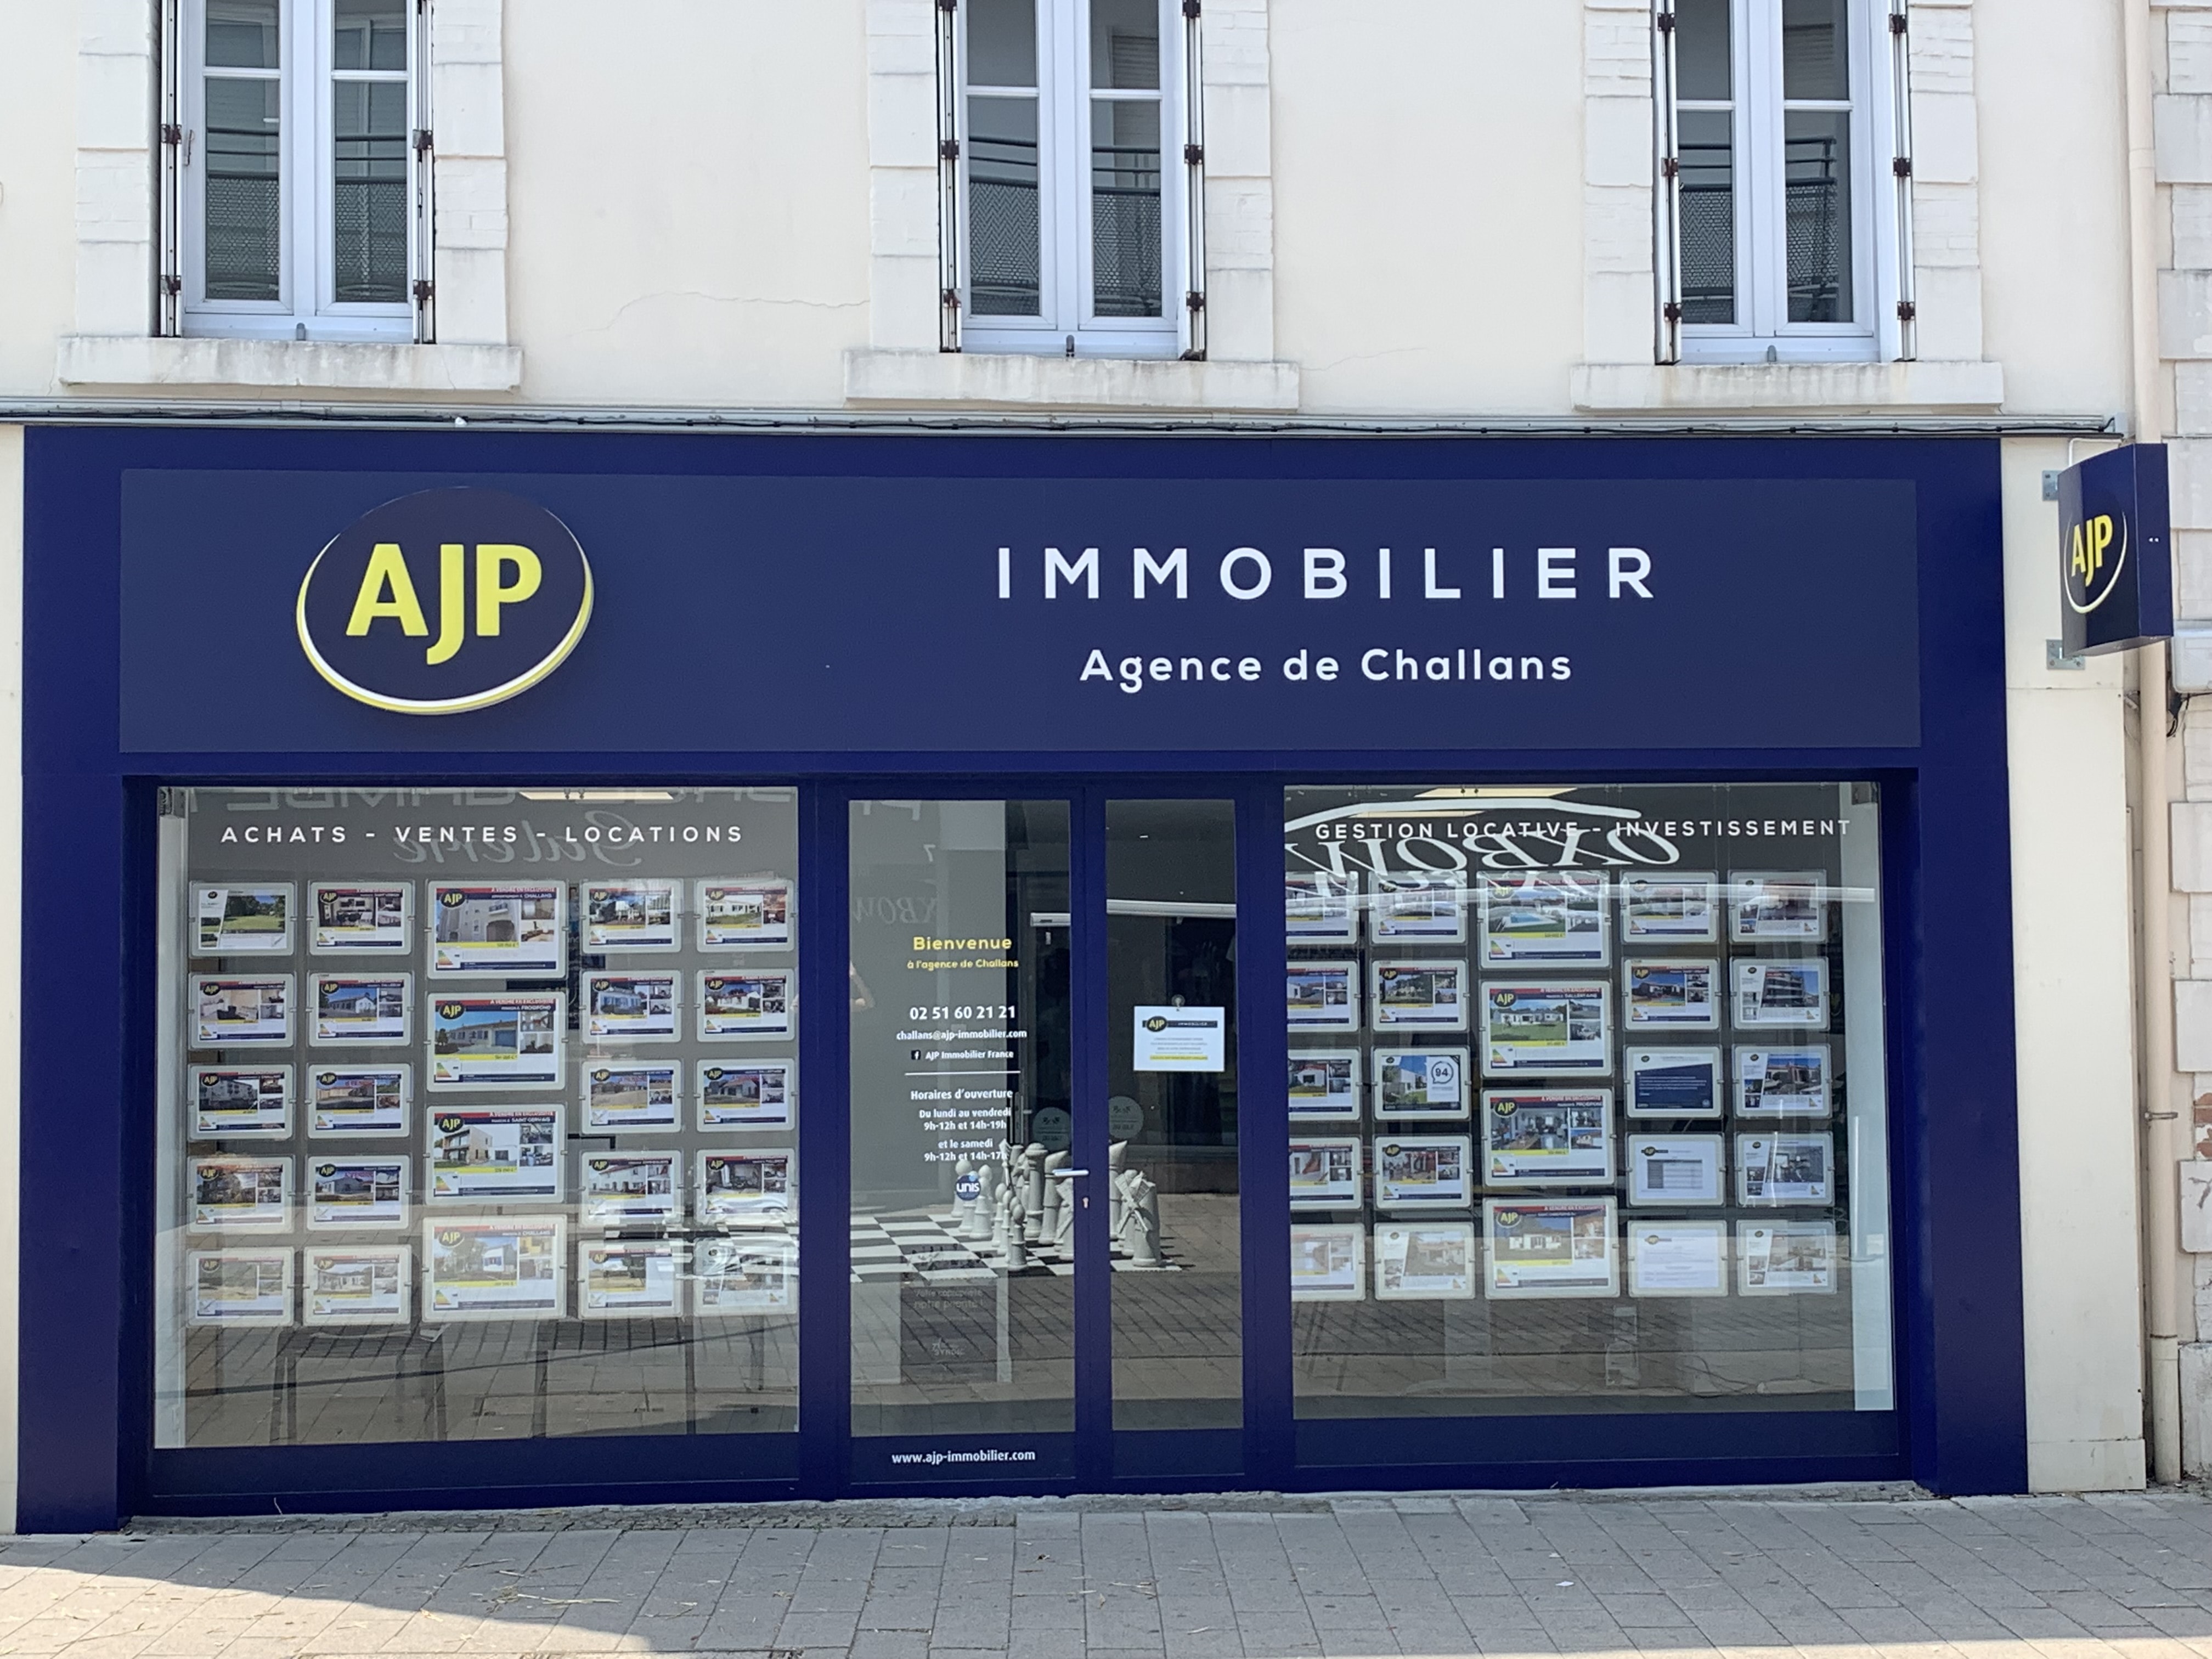 AJP Immobilier Challans